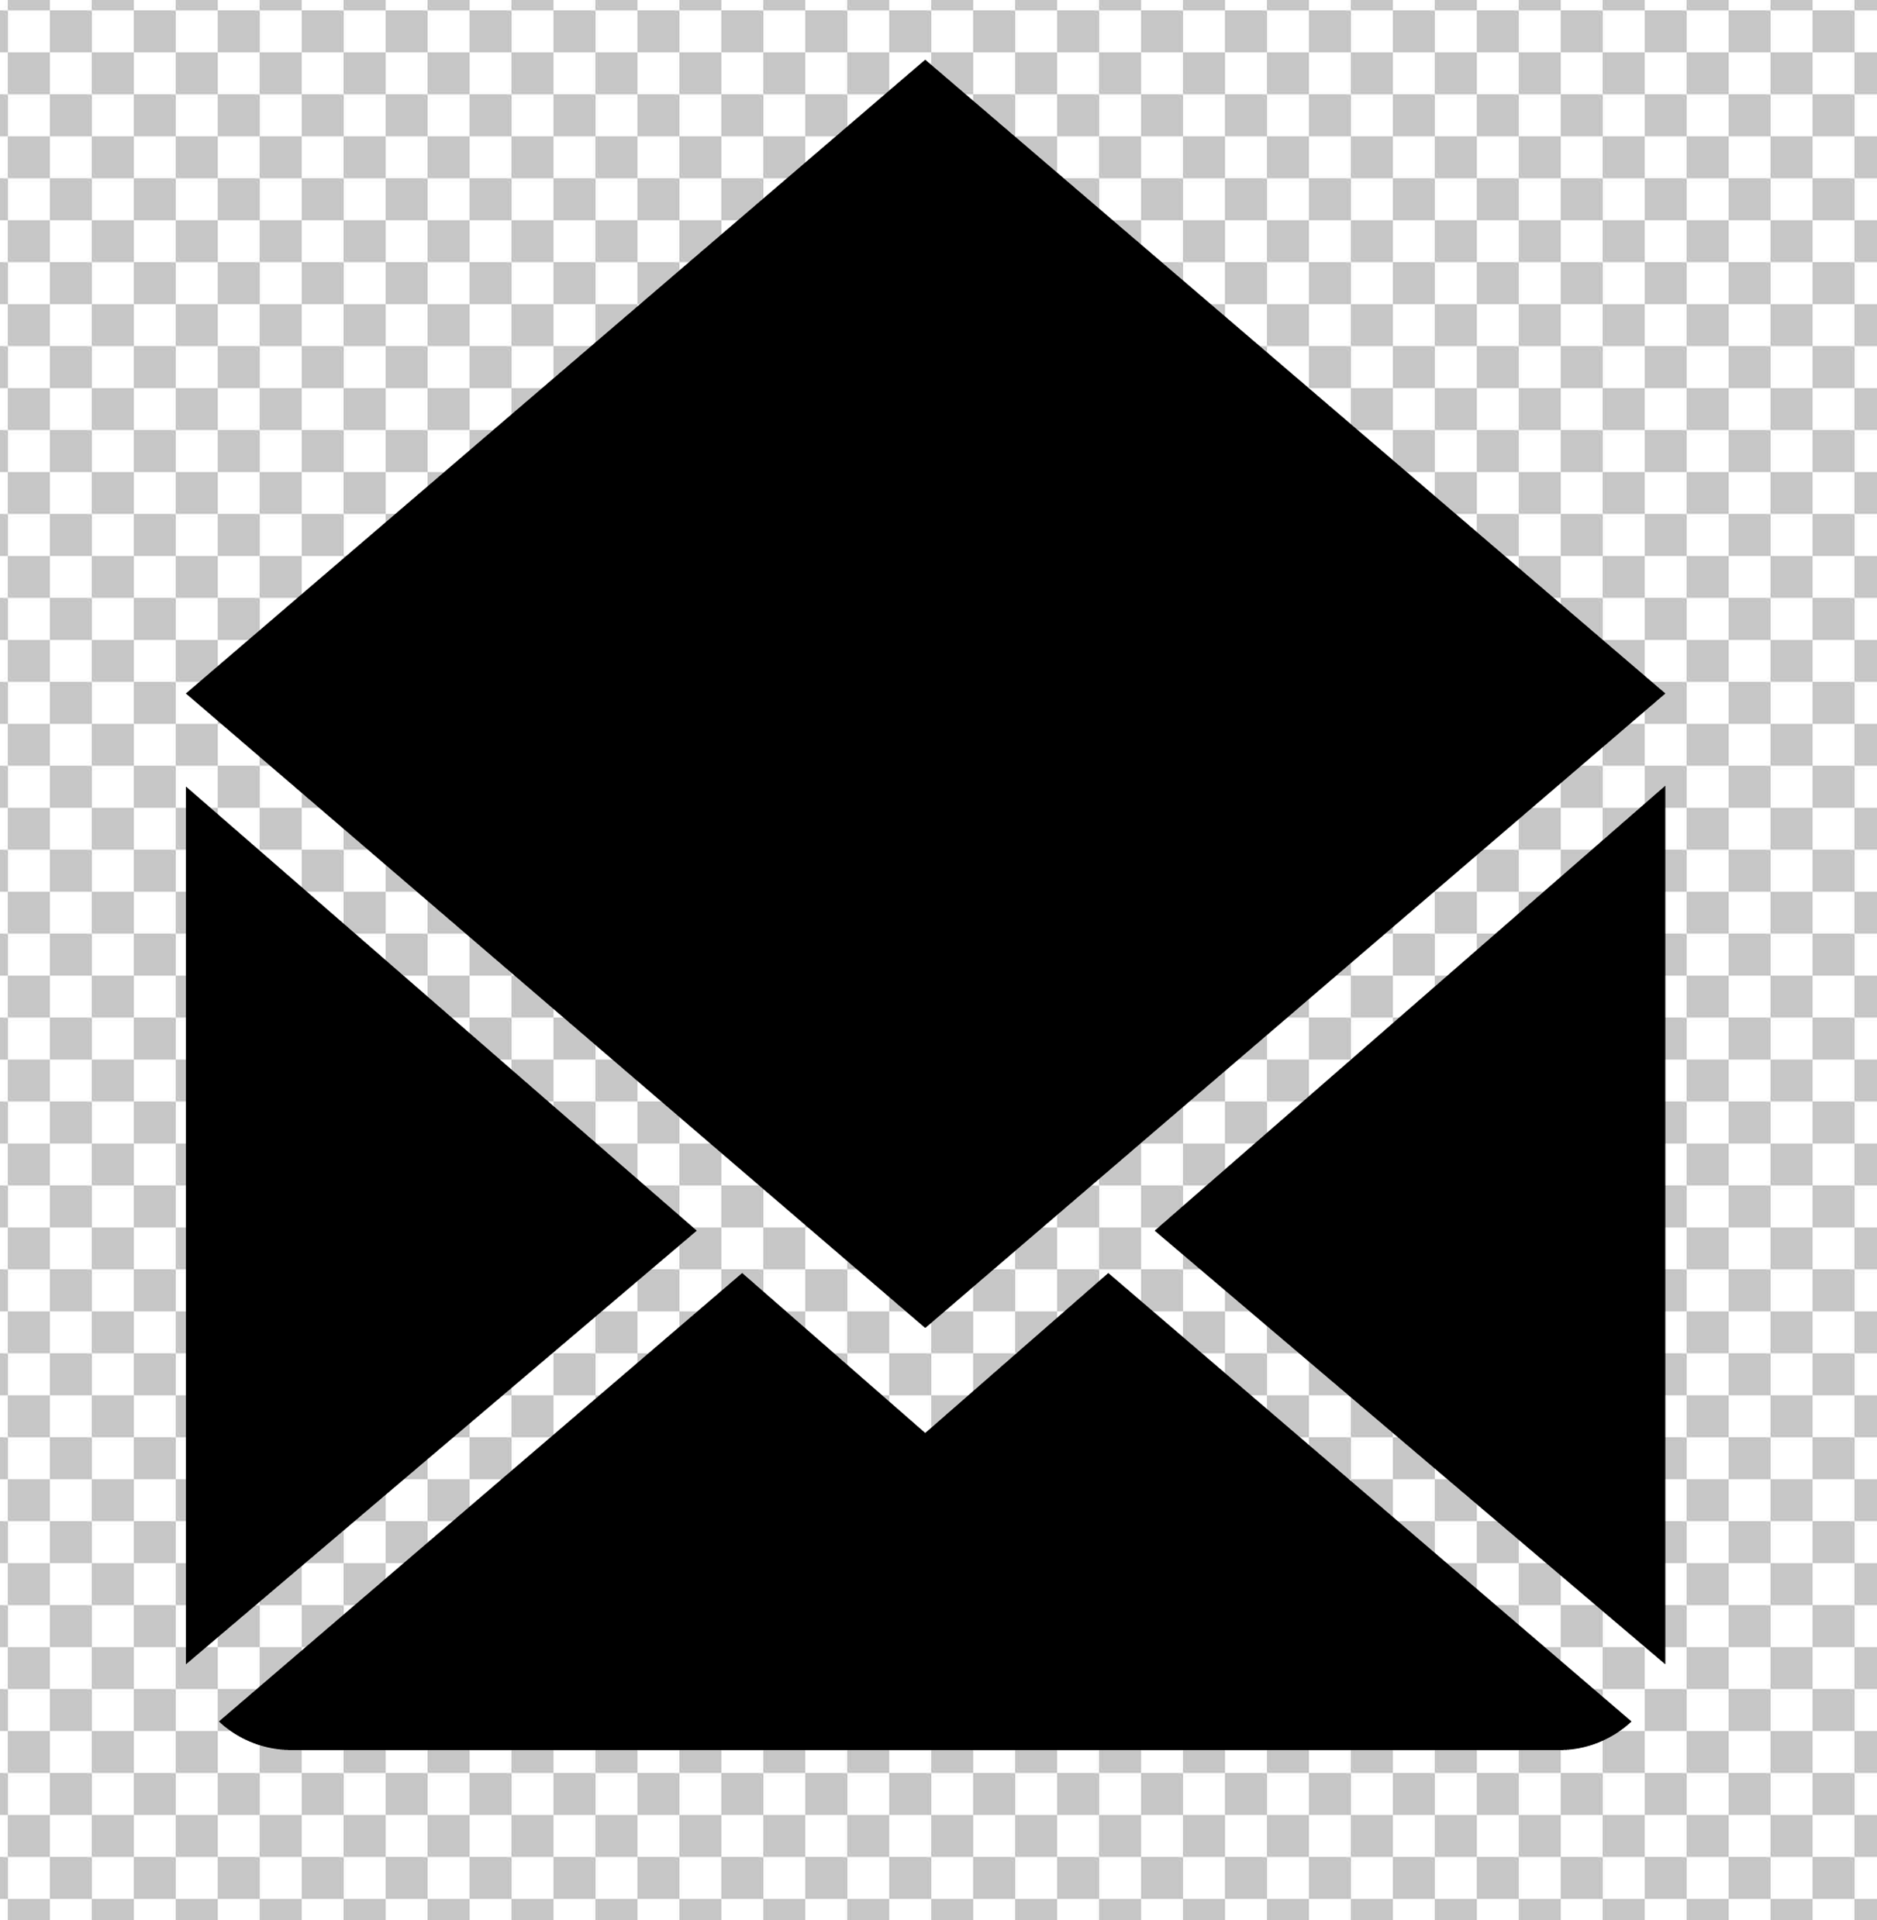 An open Envelope Icon PNG Image